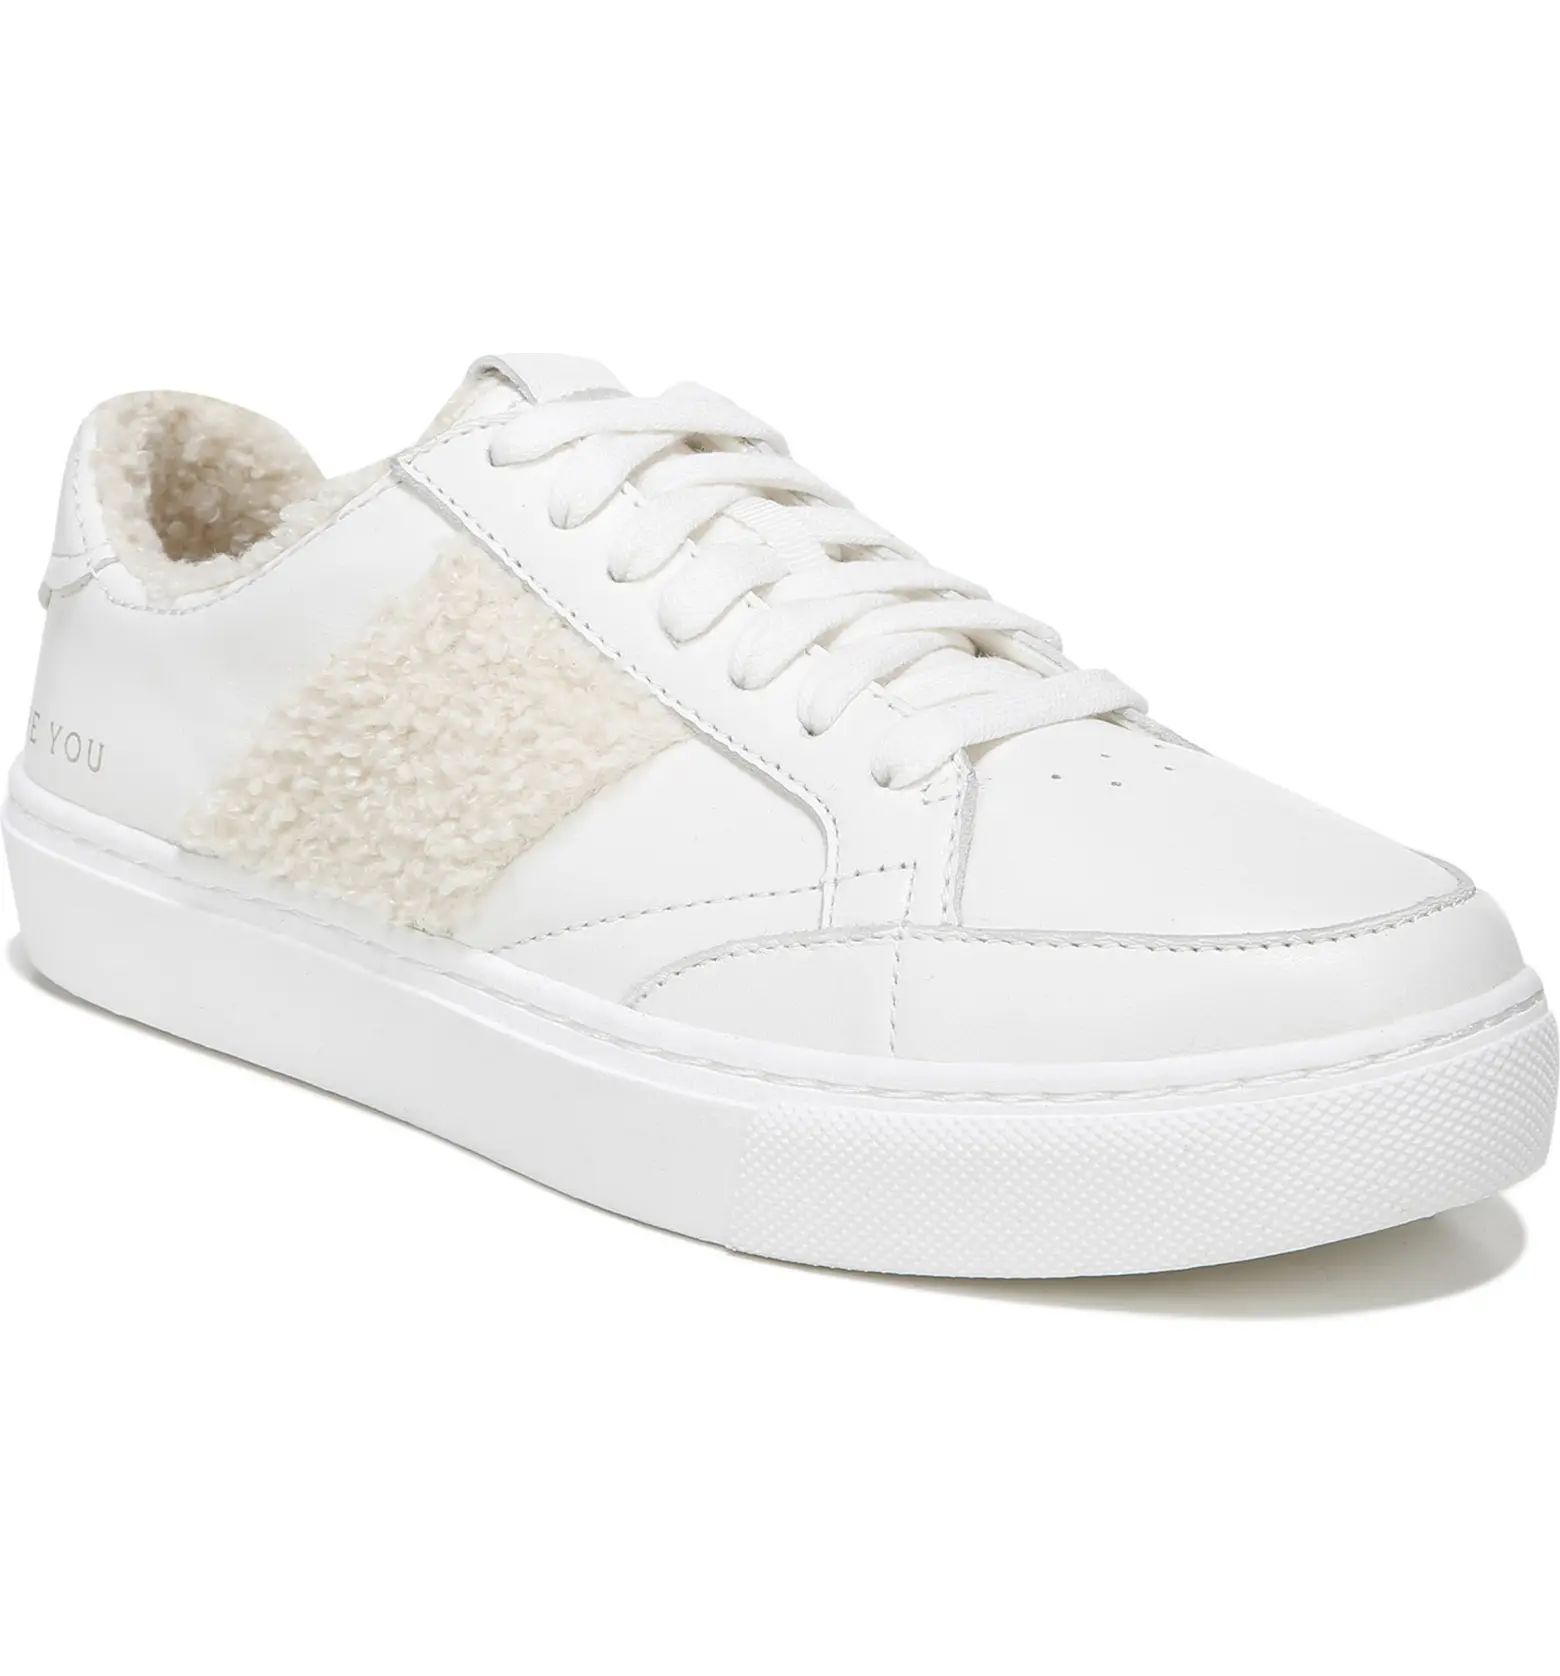 All In Chill Low Top Sneake r | Nordstrom